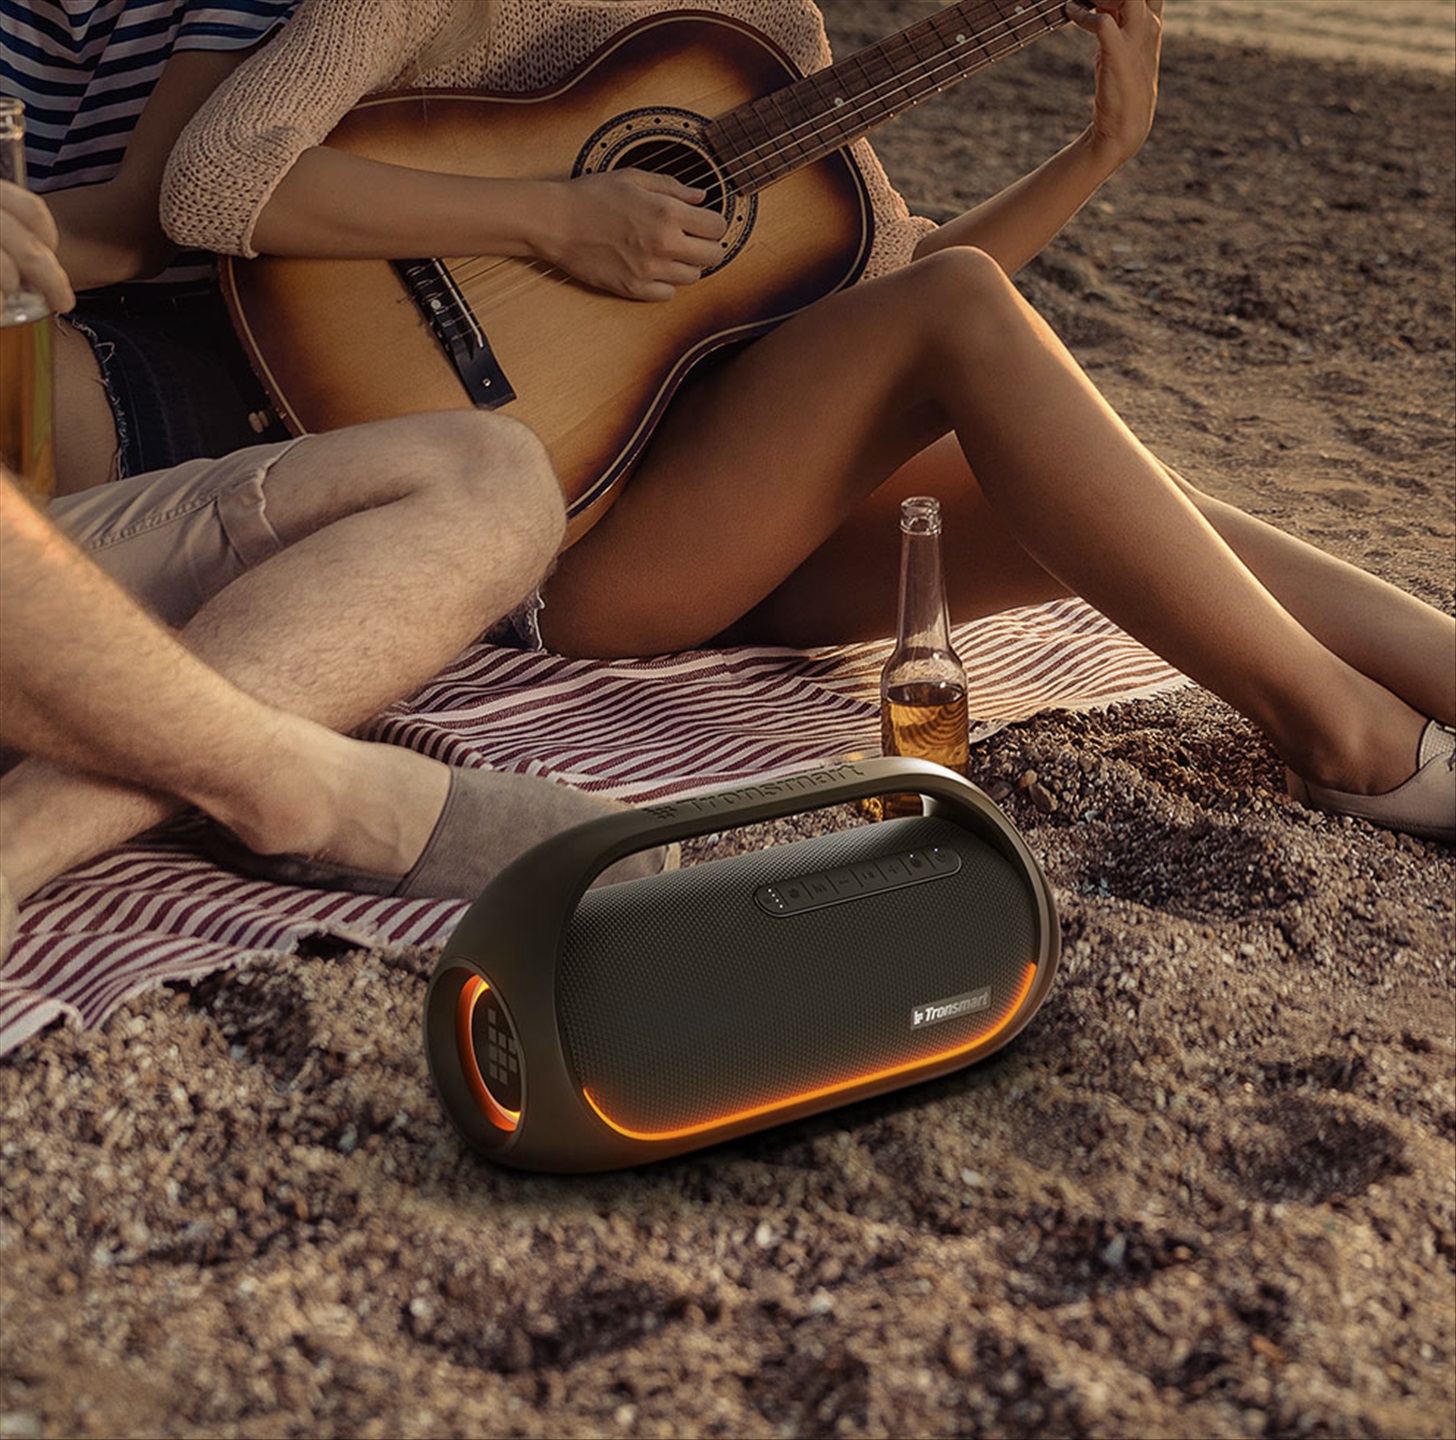 This portable speaker allows you to sync with more than 100 speakers for some party madness